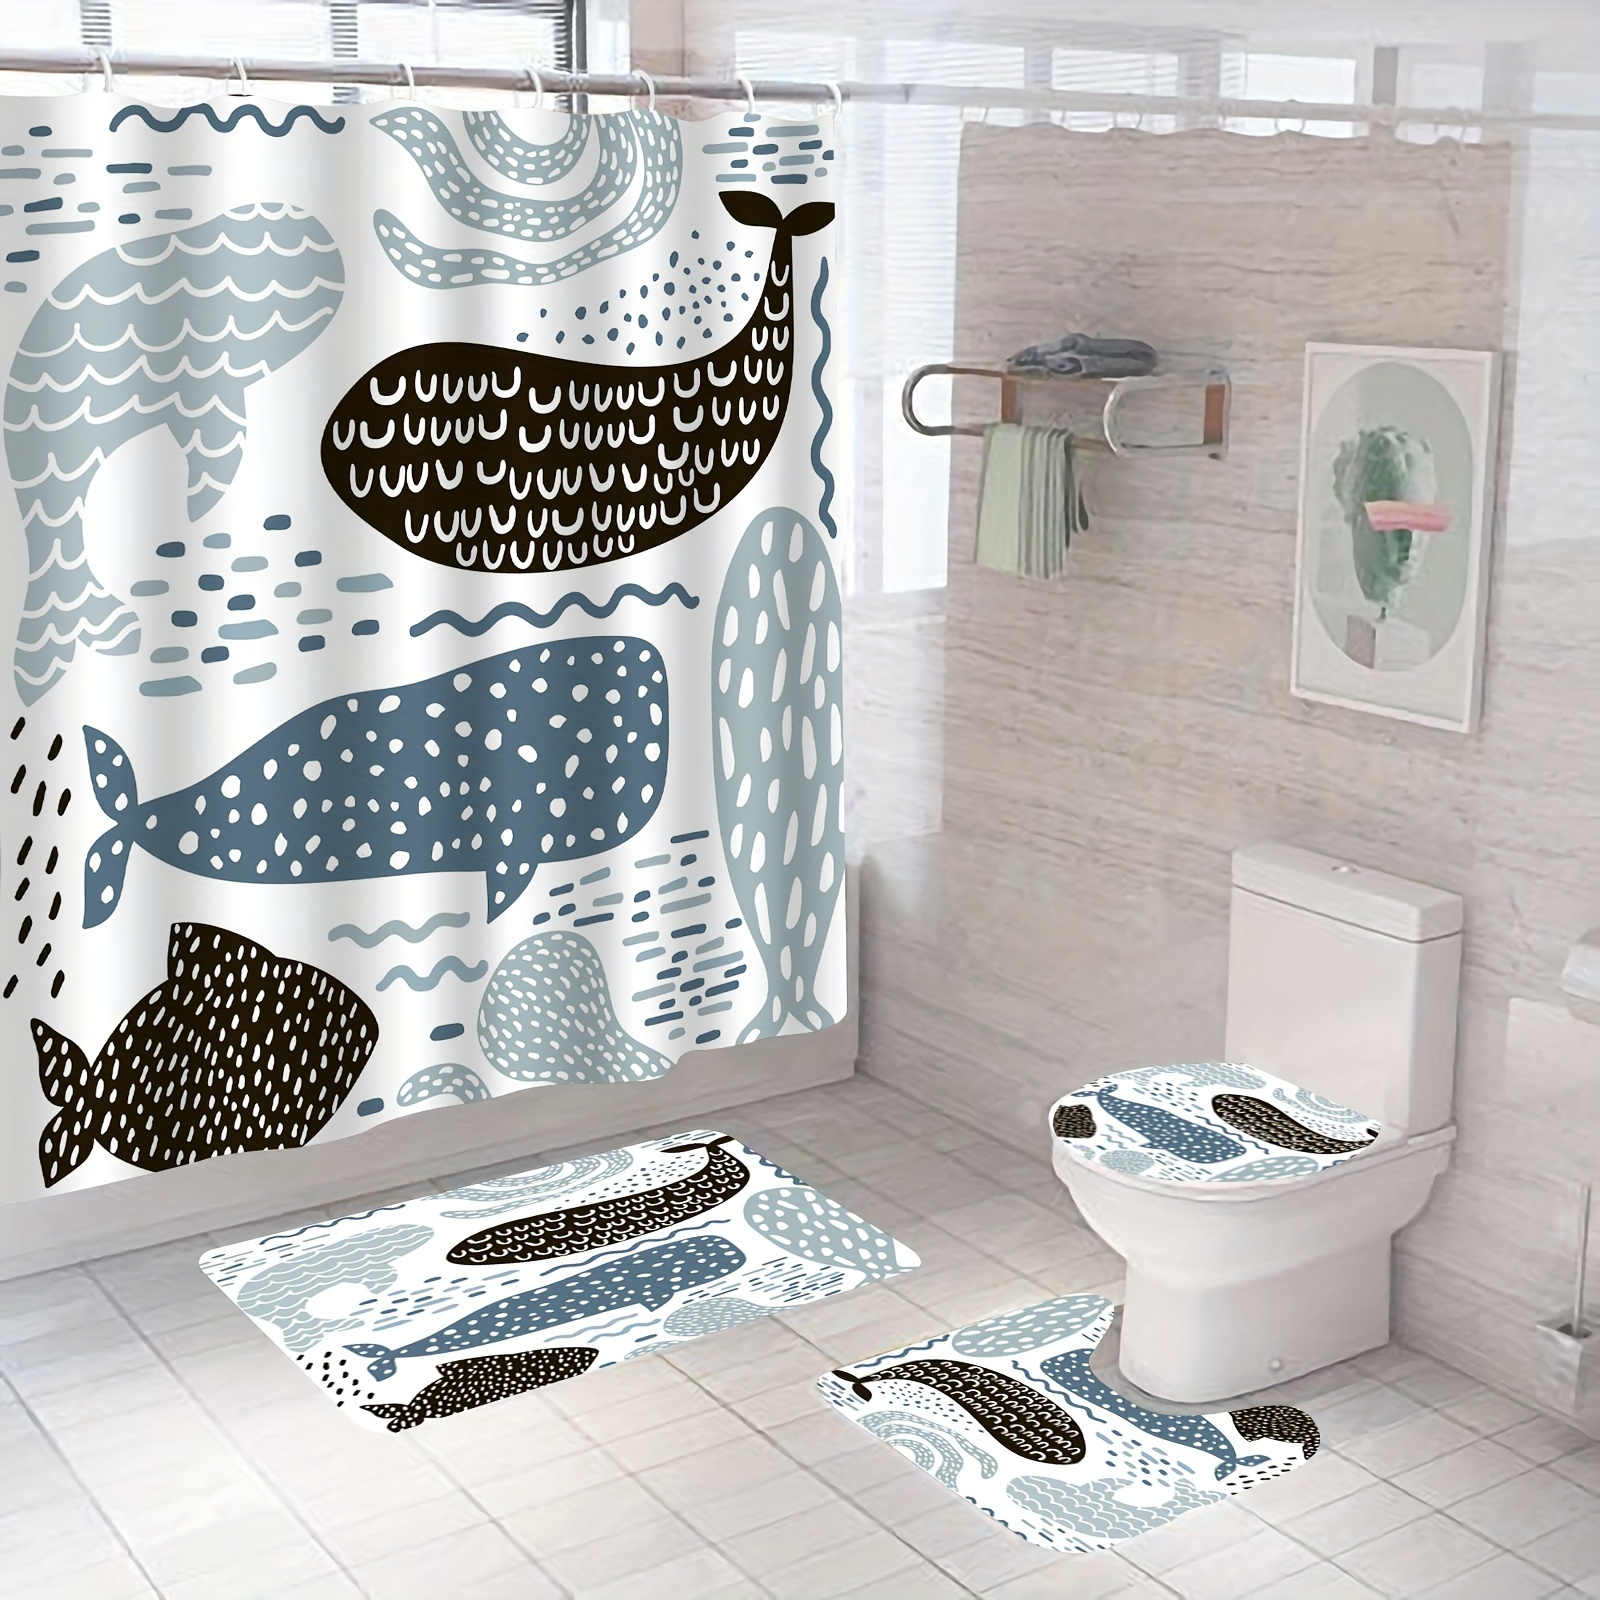 

Whale Pattern Shower Curtain Set - Cartoon Animal Ocean Theme, All-season Water-resistant Polyester Bathroom Decor With Non-slip Bath Mat, Toilet Cover, Rug, And 12 Free Hooks - Machine Washable